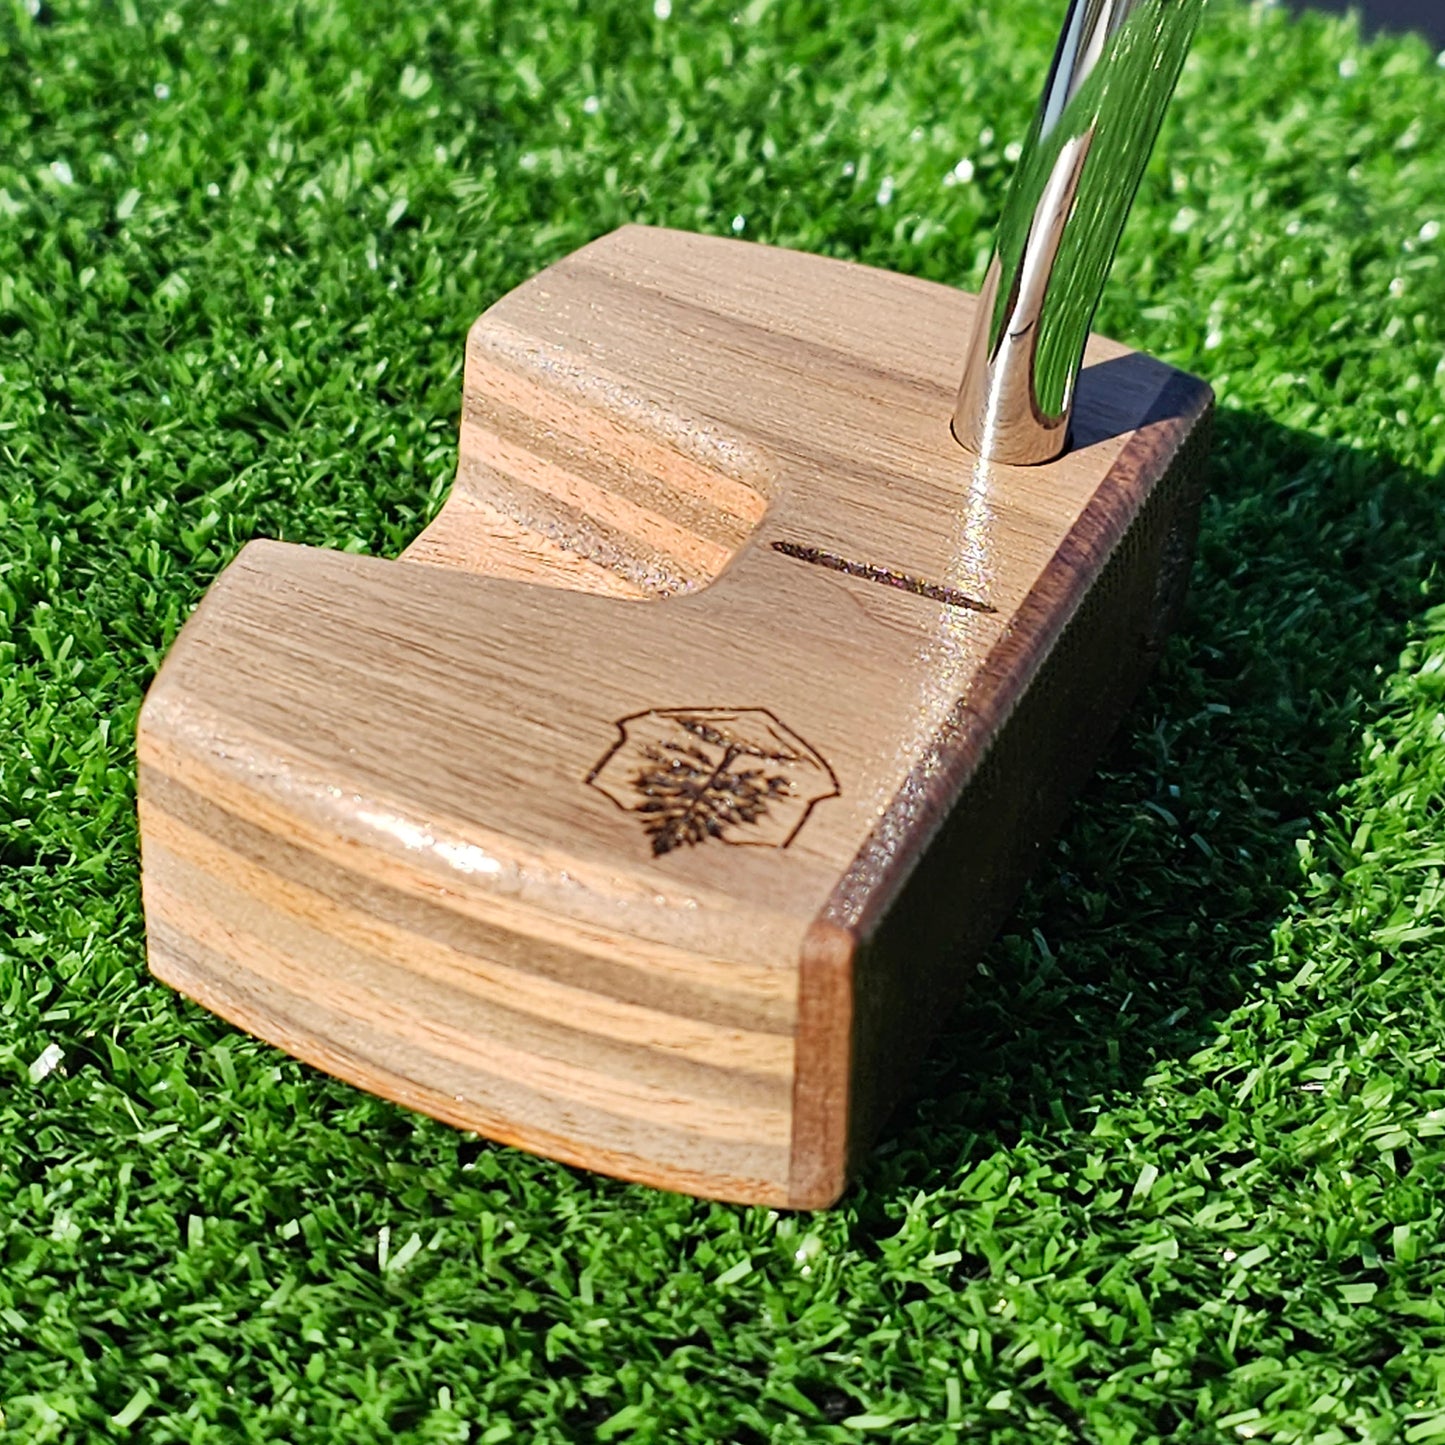 Walnut Bolivian Rosewood and Lacewood Woodrich Regal wood putter